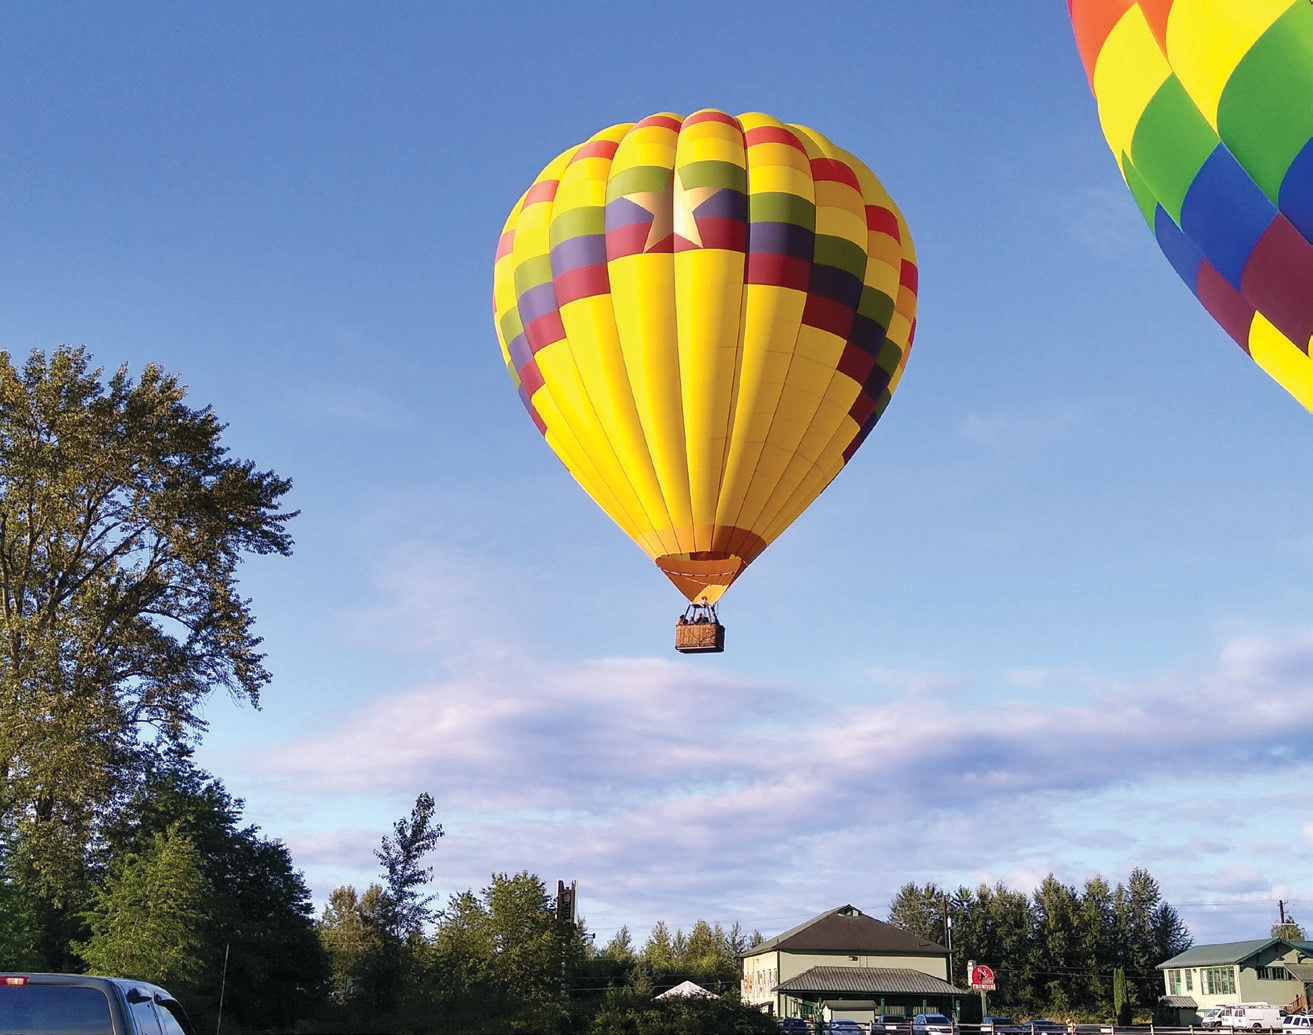 Over the Rainbow Hot Air Balloon Rides for those who want to get a better perspective on Woodinville.